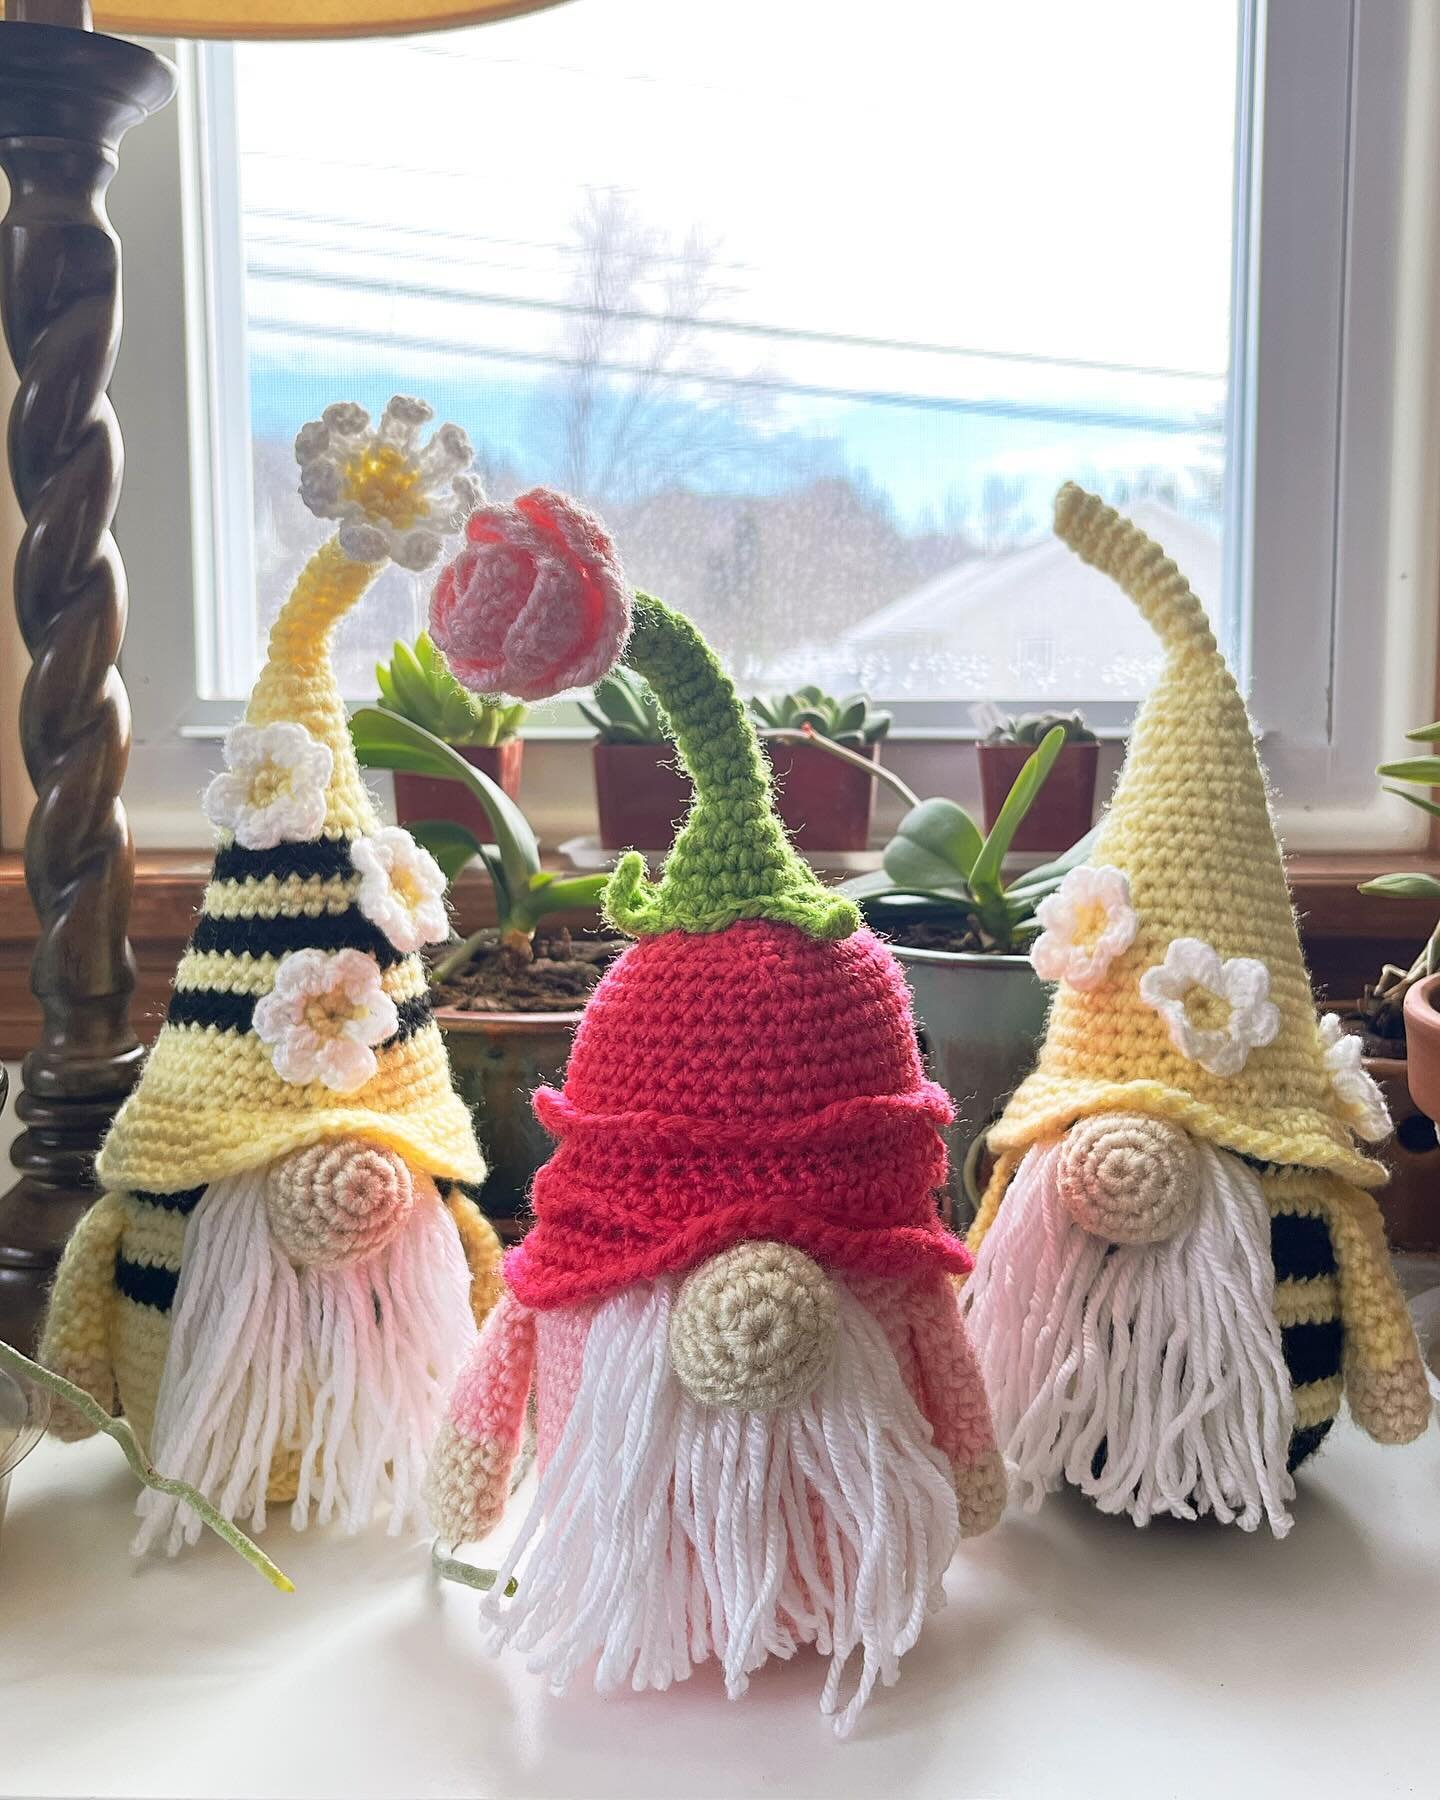 Happy Mother&rsquo;s Day out there to all the amazing moms in our lives. We couldn&rsquo;t do it without you! 
.
Made a few spring flower gnomes and bee gnomes for the gnome loving moms out there. 
.
.
#Handmade #Crochet #Gonk #Gnome #OldLadyStatus